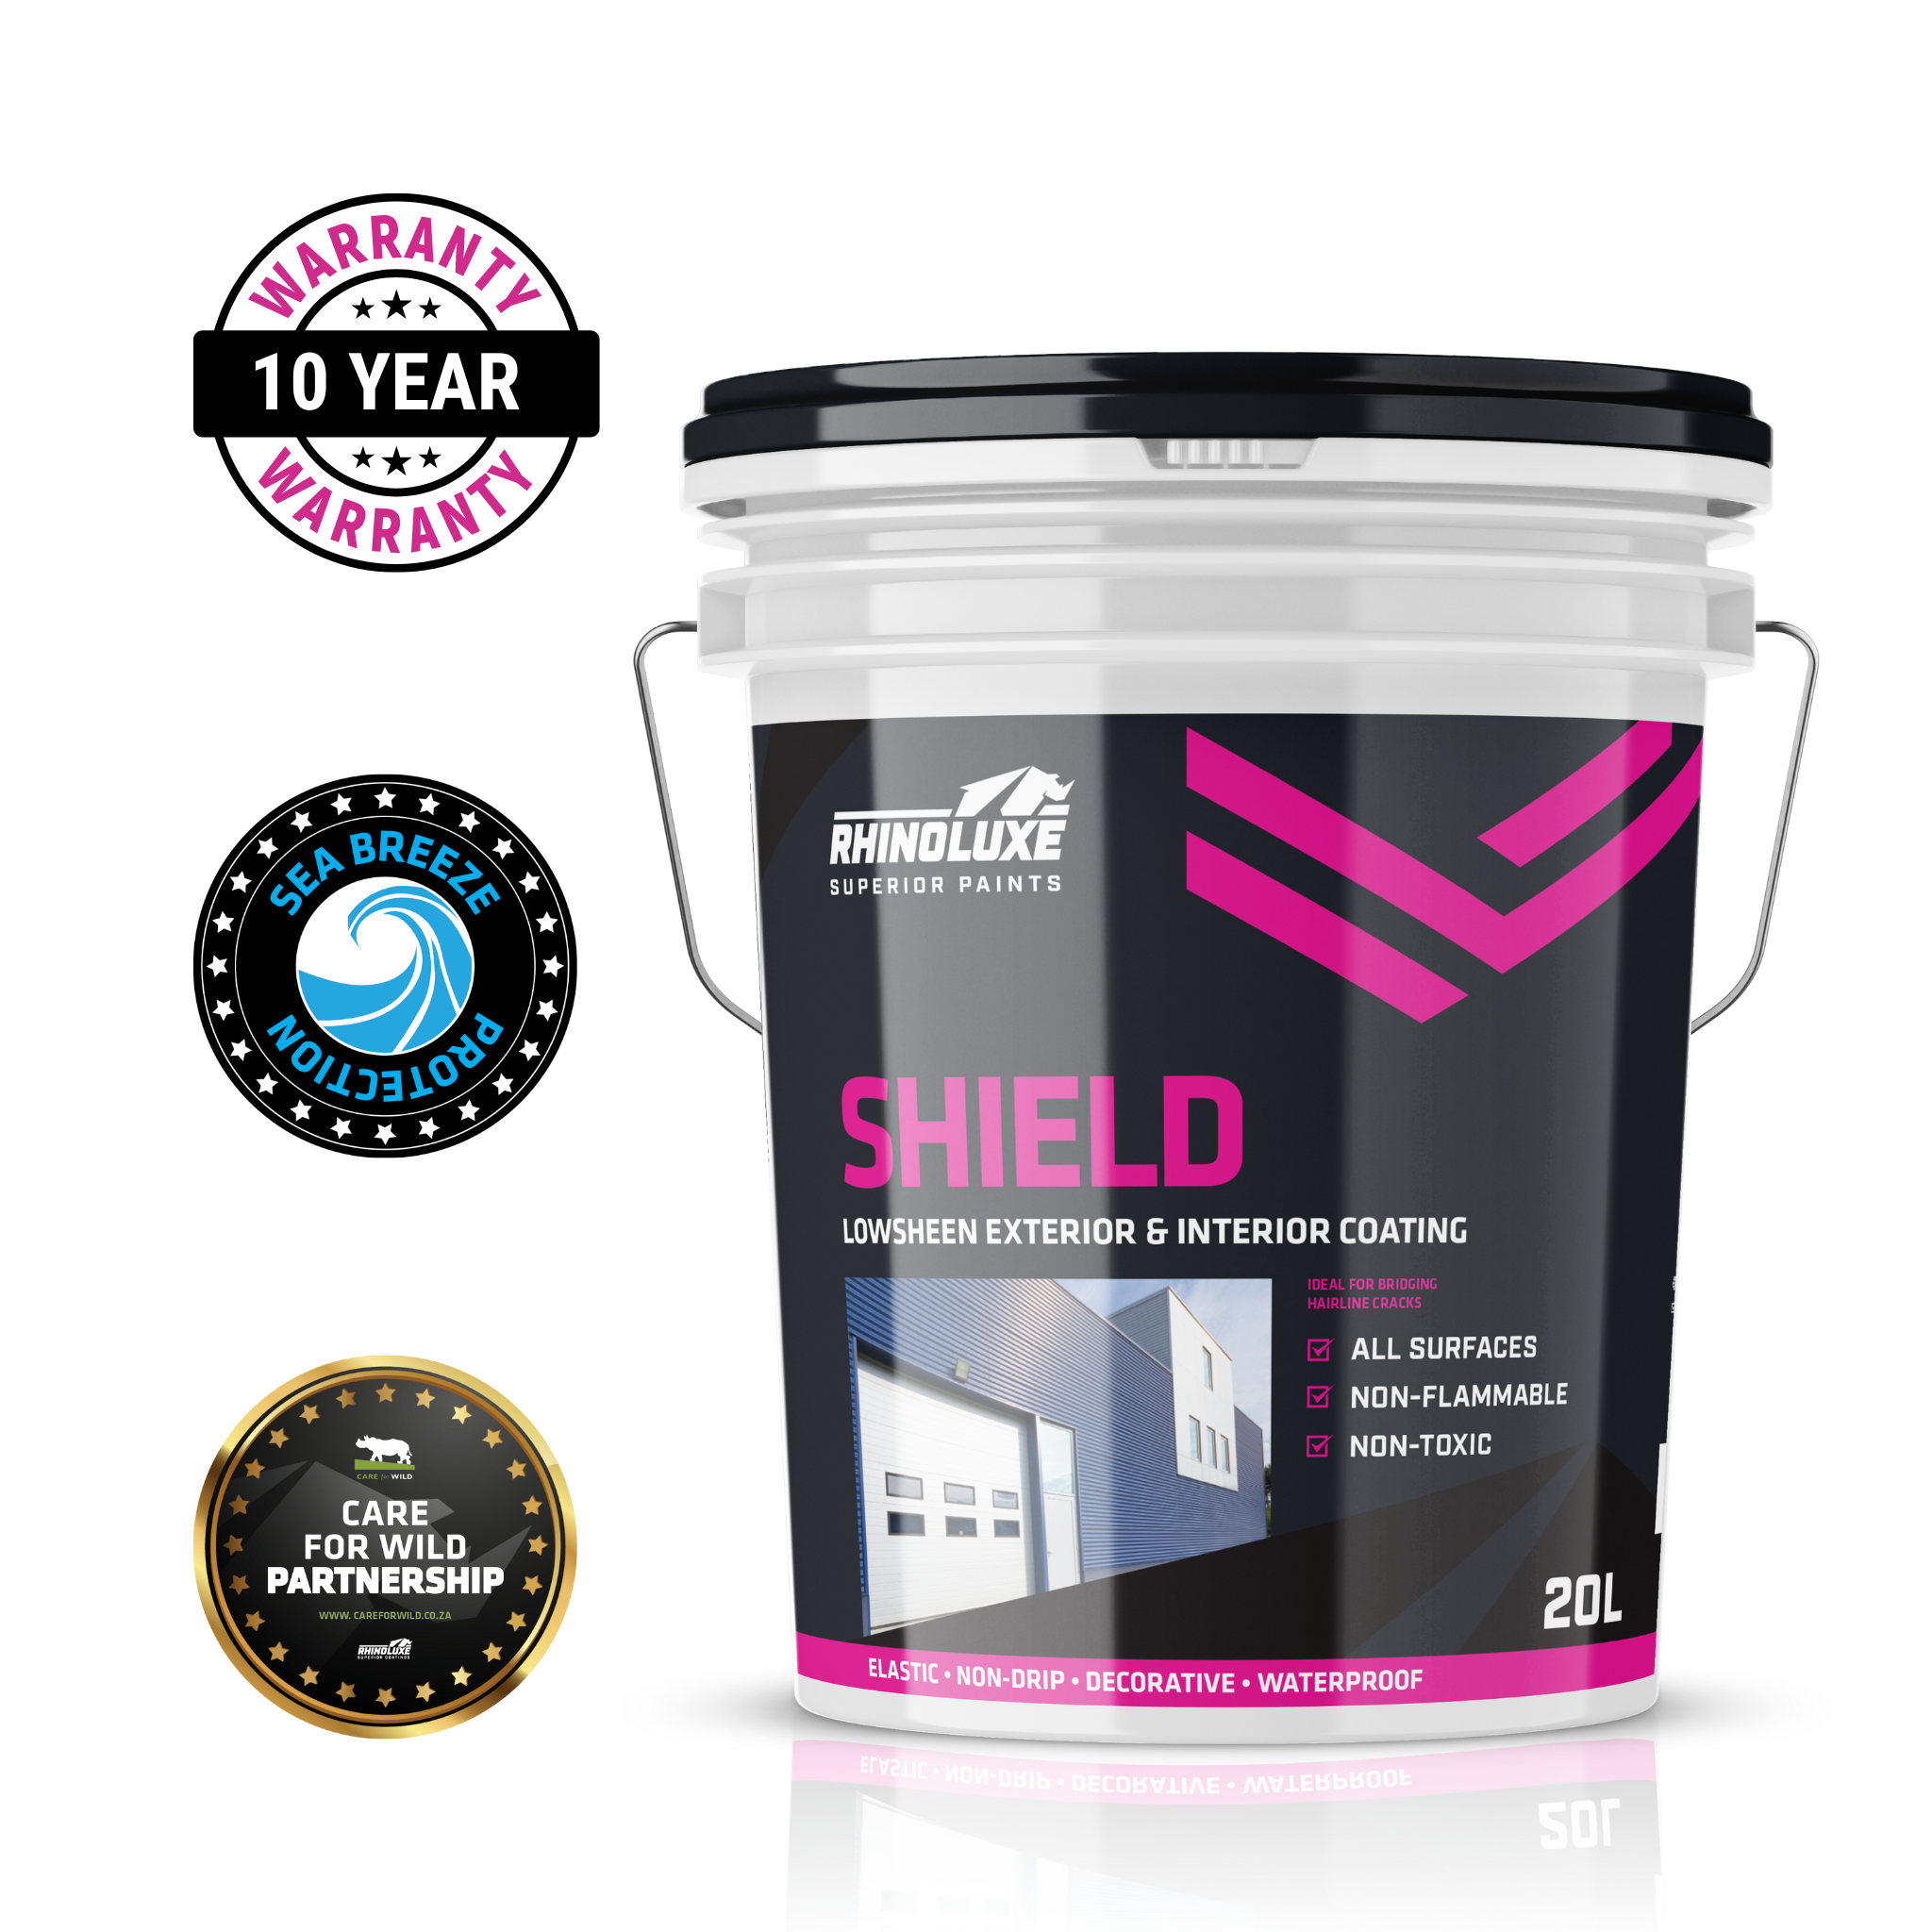 Buy Shield, Premium Waterproof Paint for Roofs and Walls